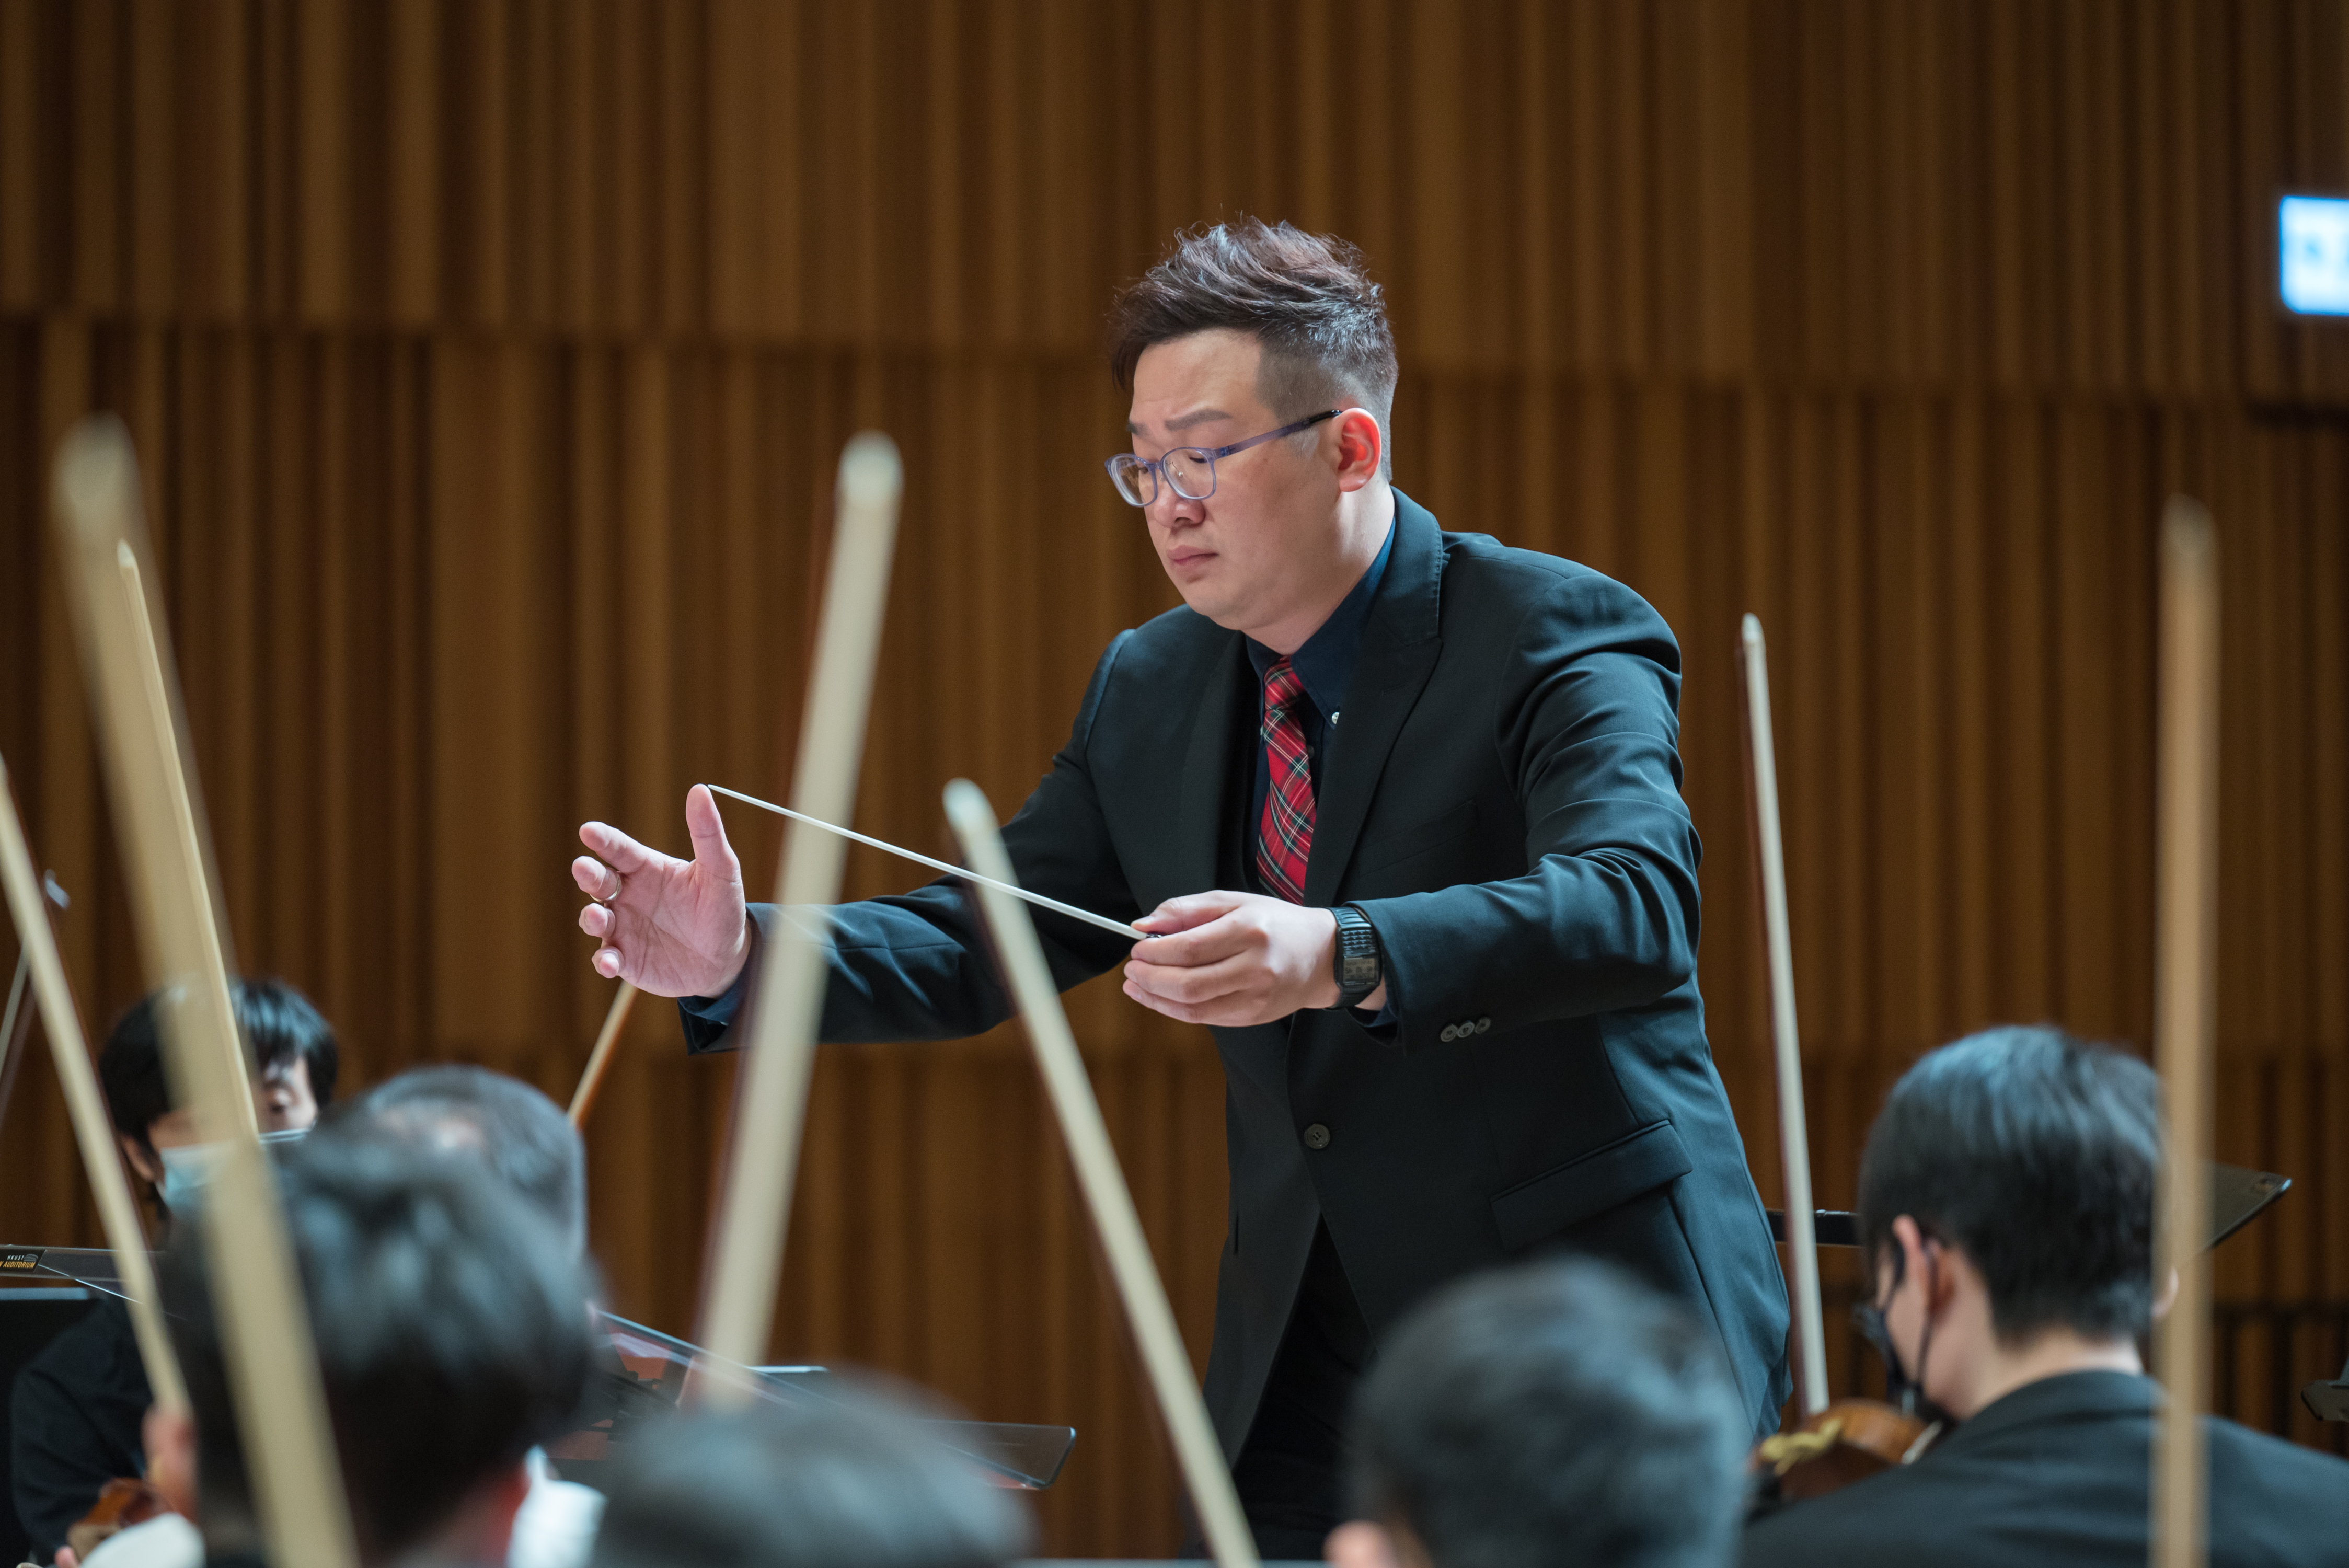 Winter Concert by University Philharmonic Orchestra_Conductor Ken Cheng